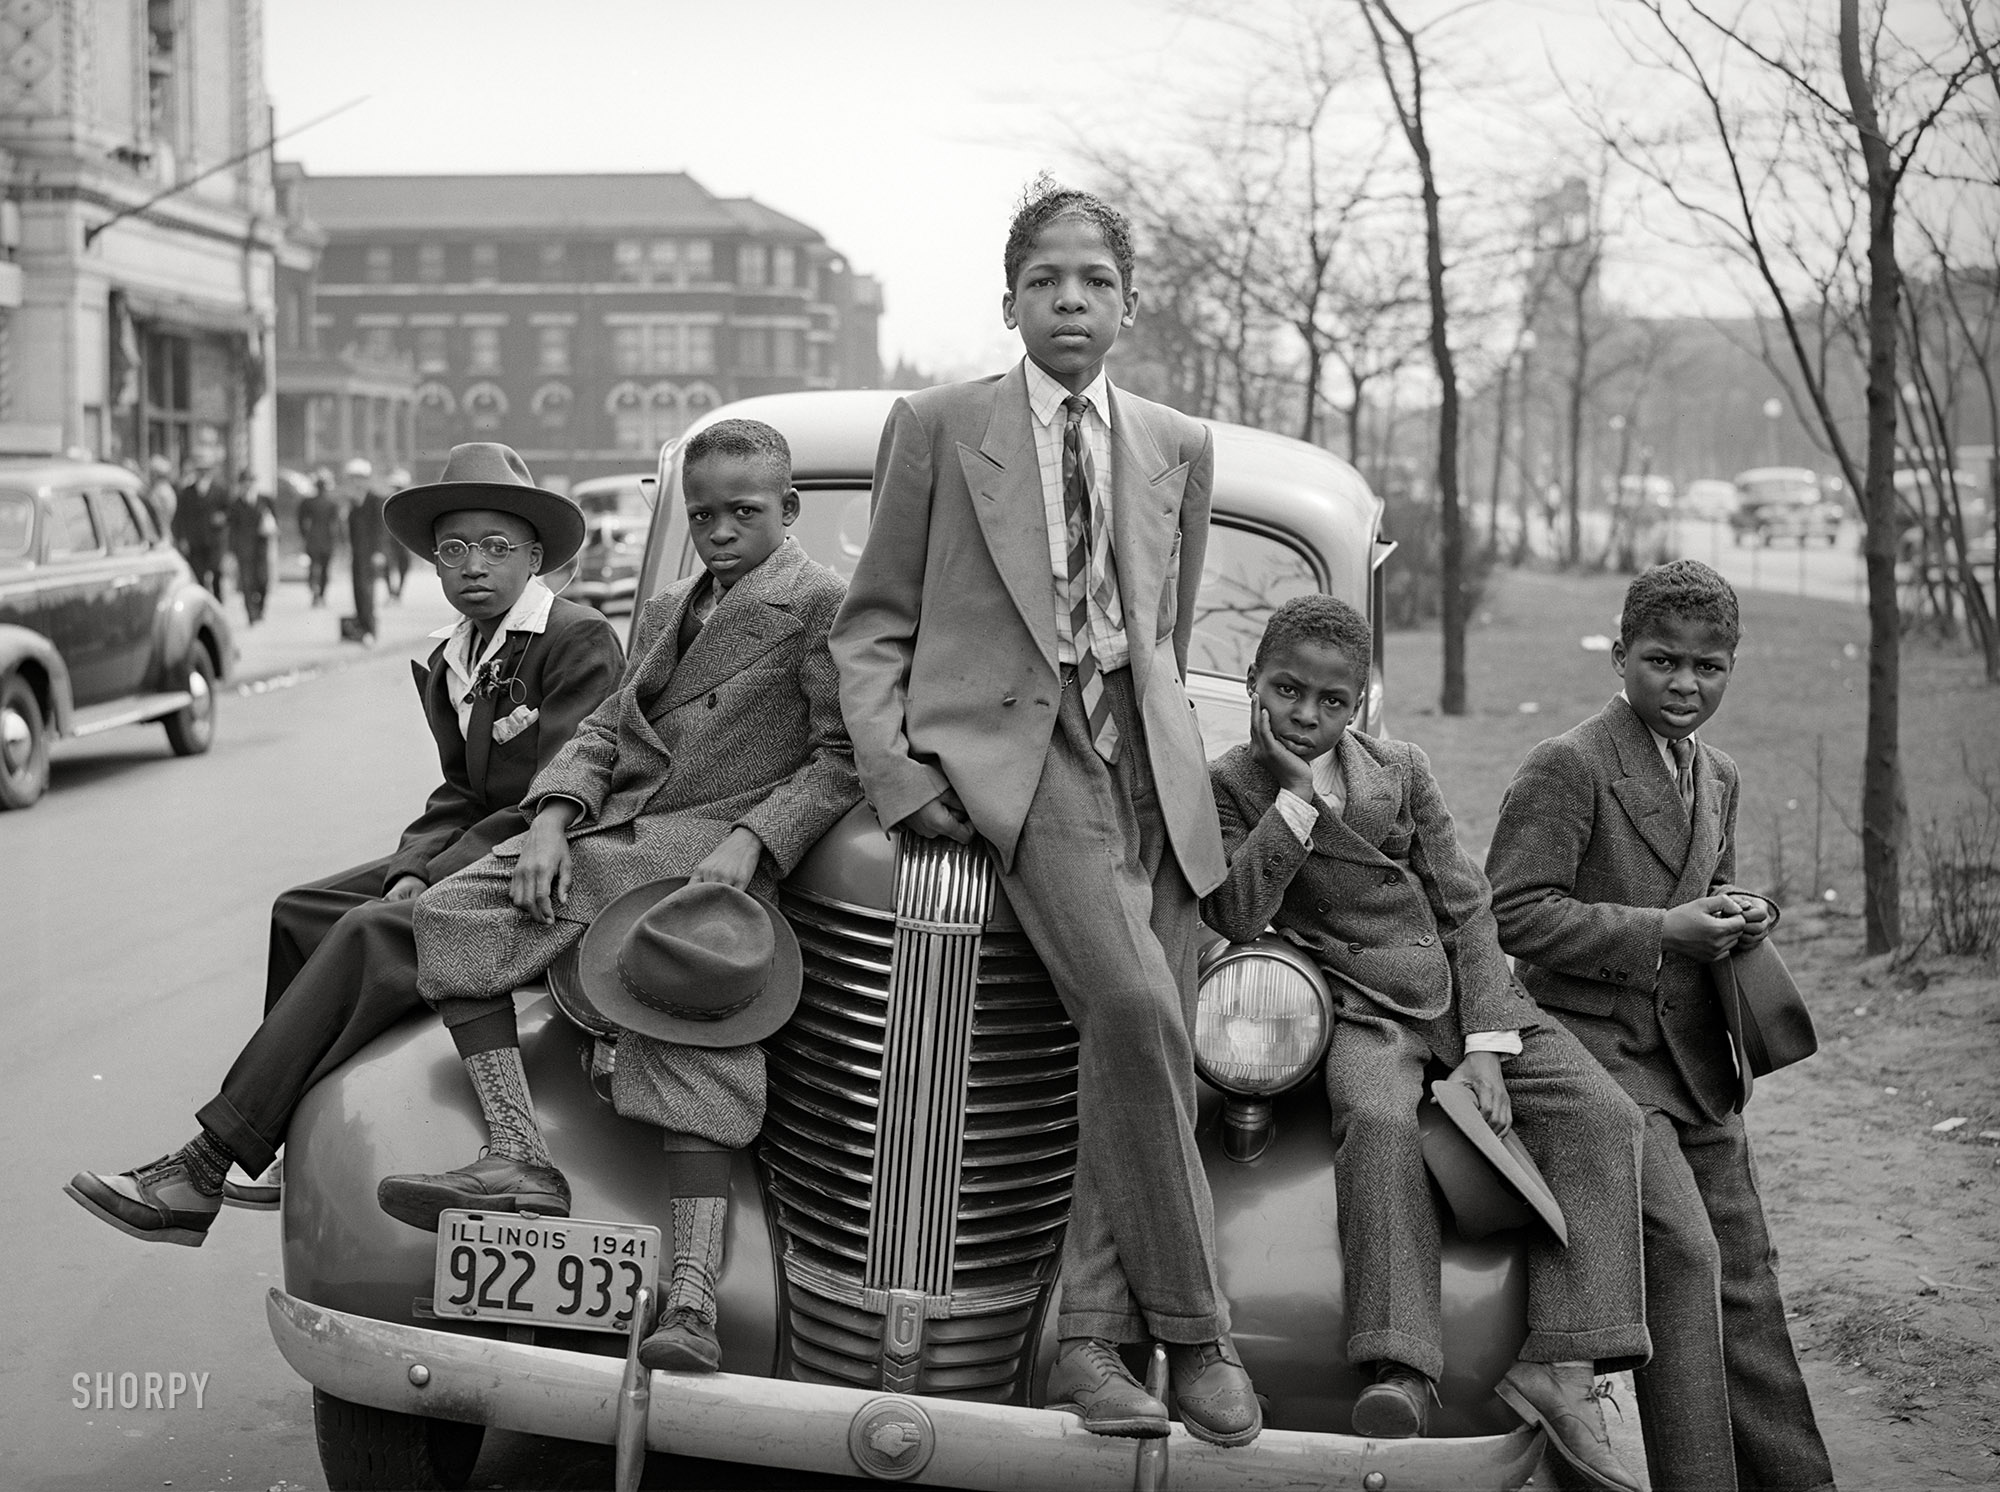 &nbsp; &nbsp; &nbsp; &nbsp; Happy Easter from Chicago, and from Shorpy.
April 1941. "Negro boys on Easter morning, Southside Chicago." Medium format acetate negative by Russell Lee for the Farm Security Administration. View full size.